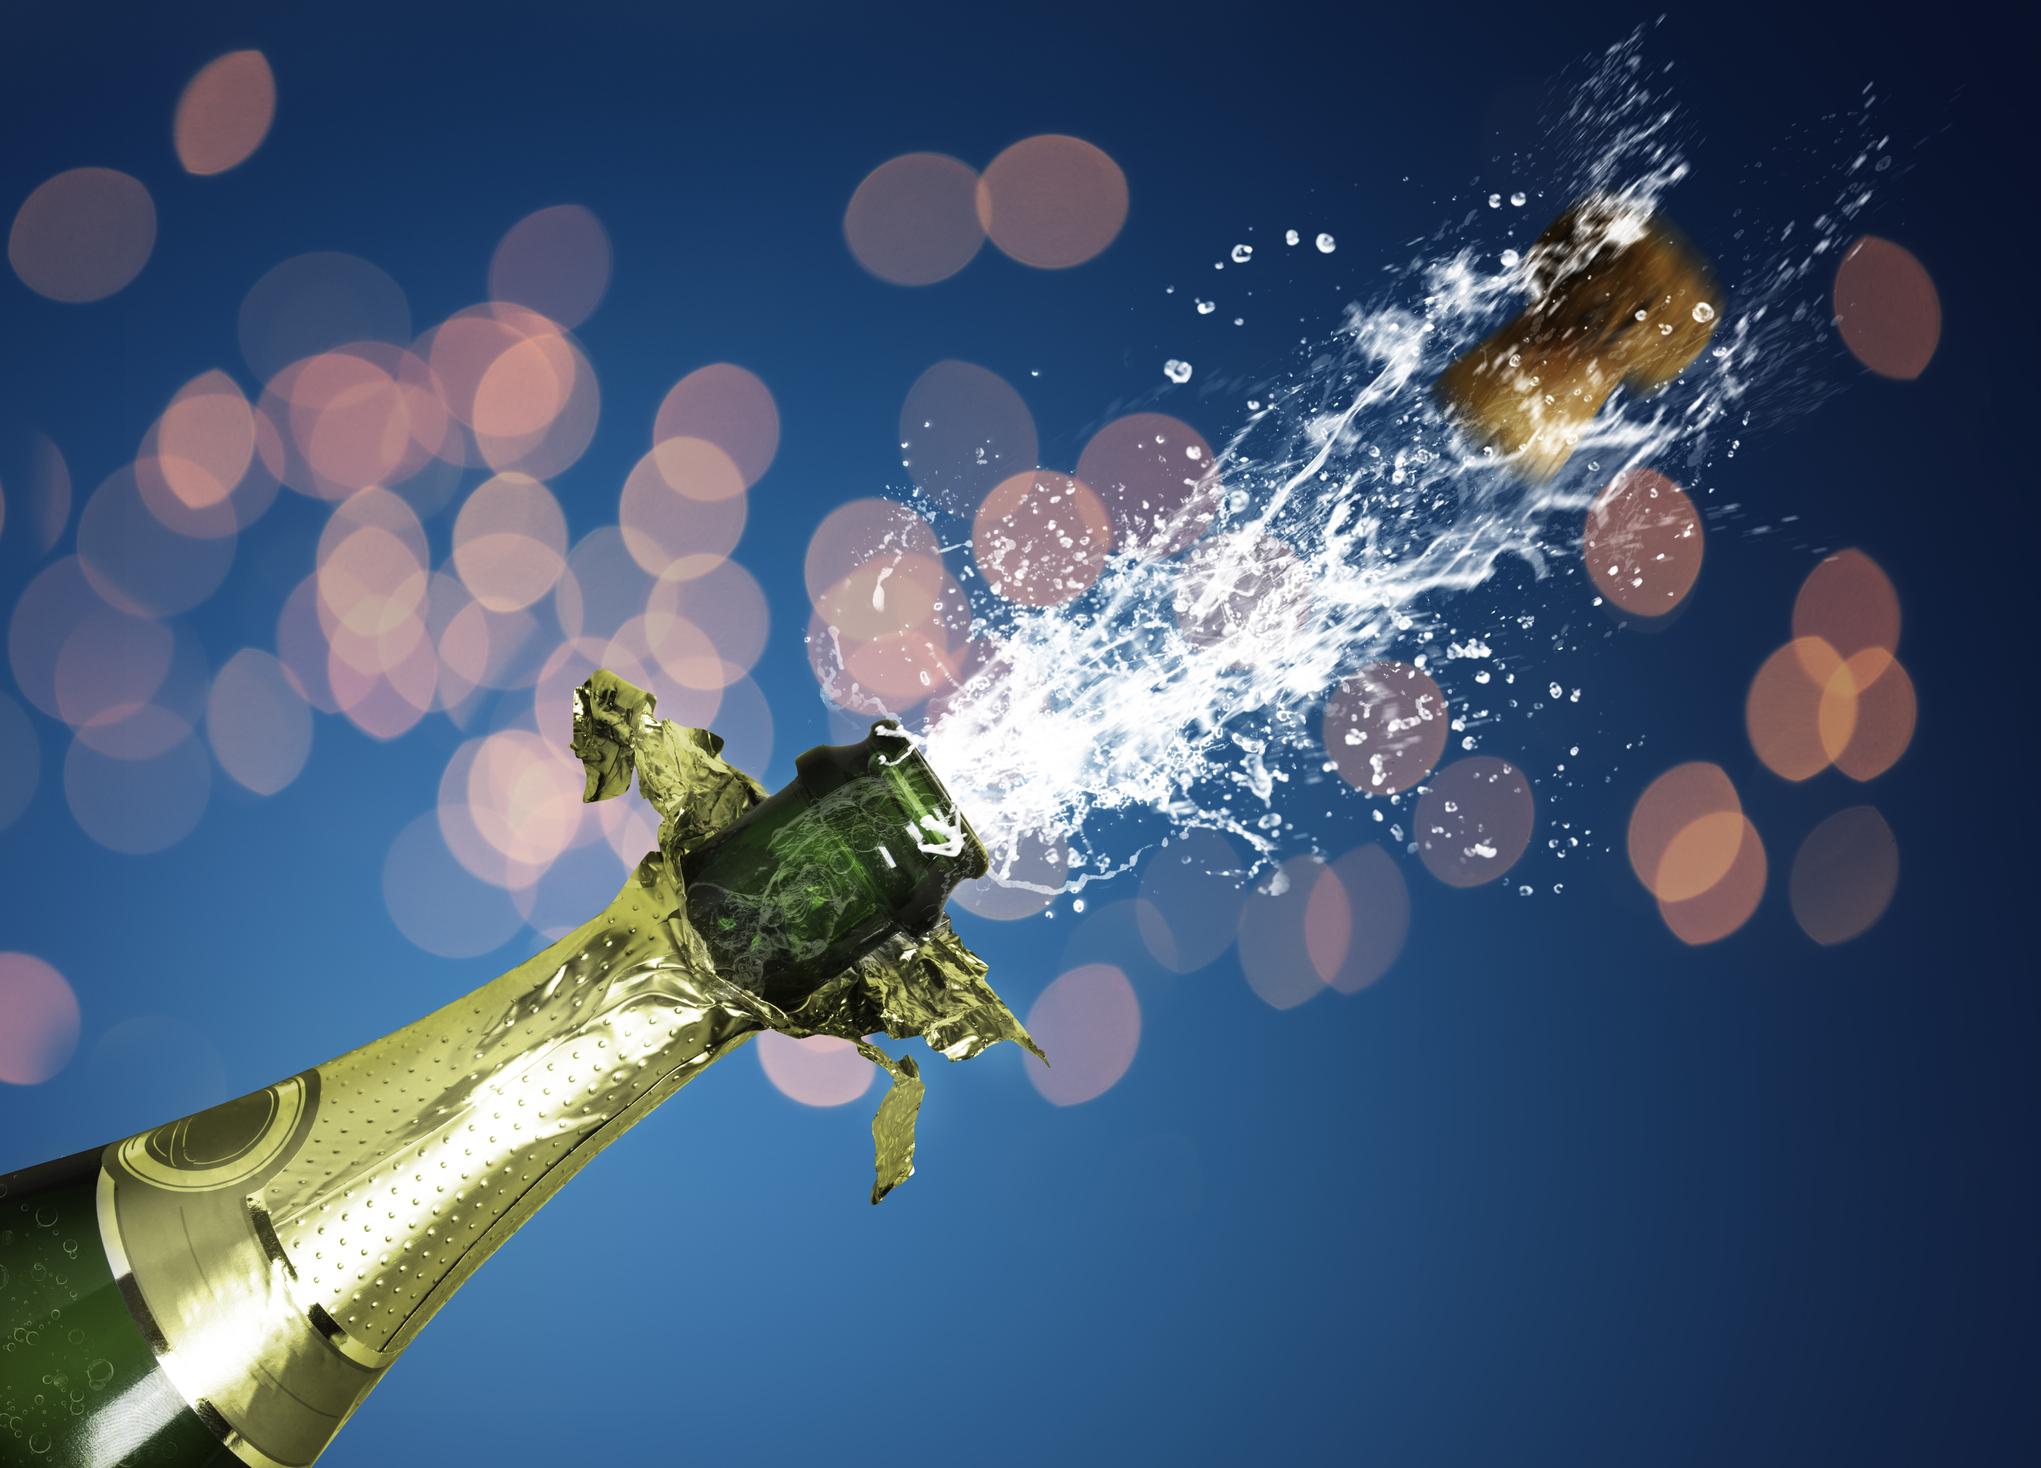 Eye damage: watch out for champagne corks during the holidays! 